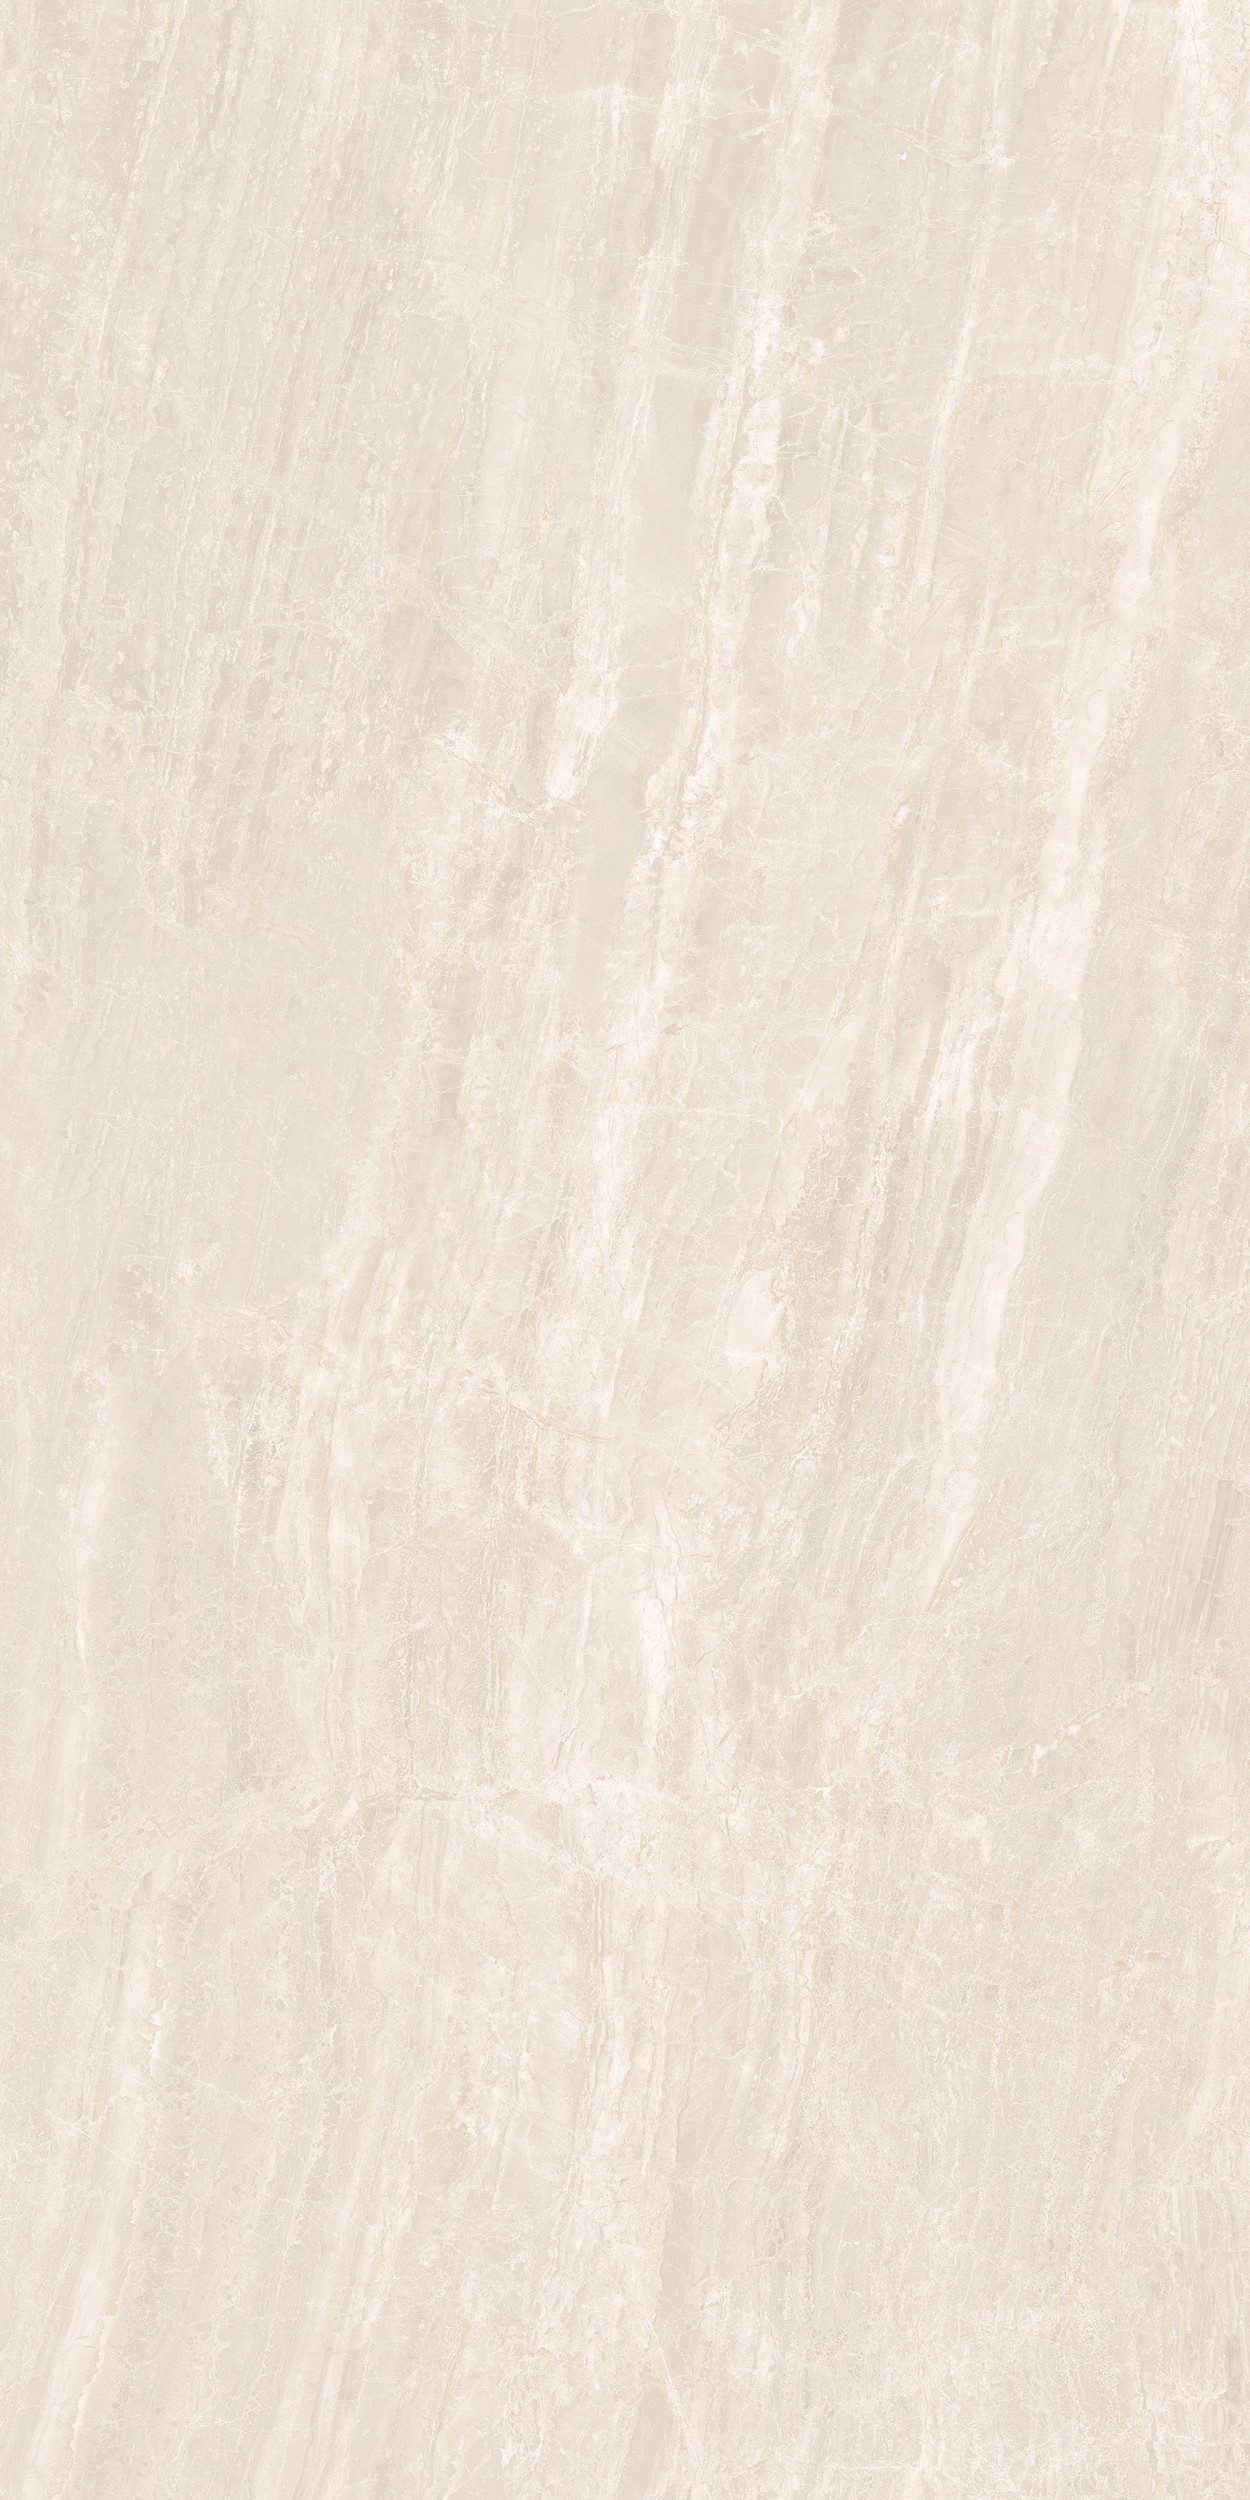 24 X 24 Cosmic Ivory Matt finished  Rectified Porcelain Tile (SPECIAL ORDER ONLY)